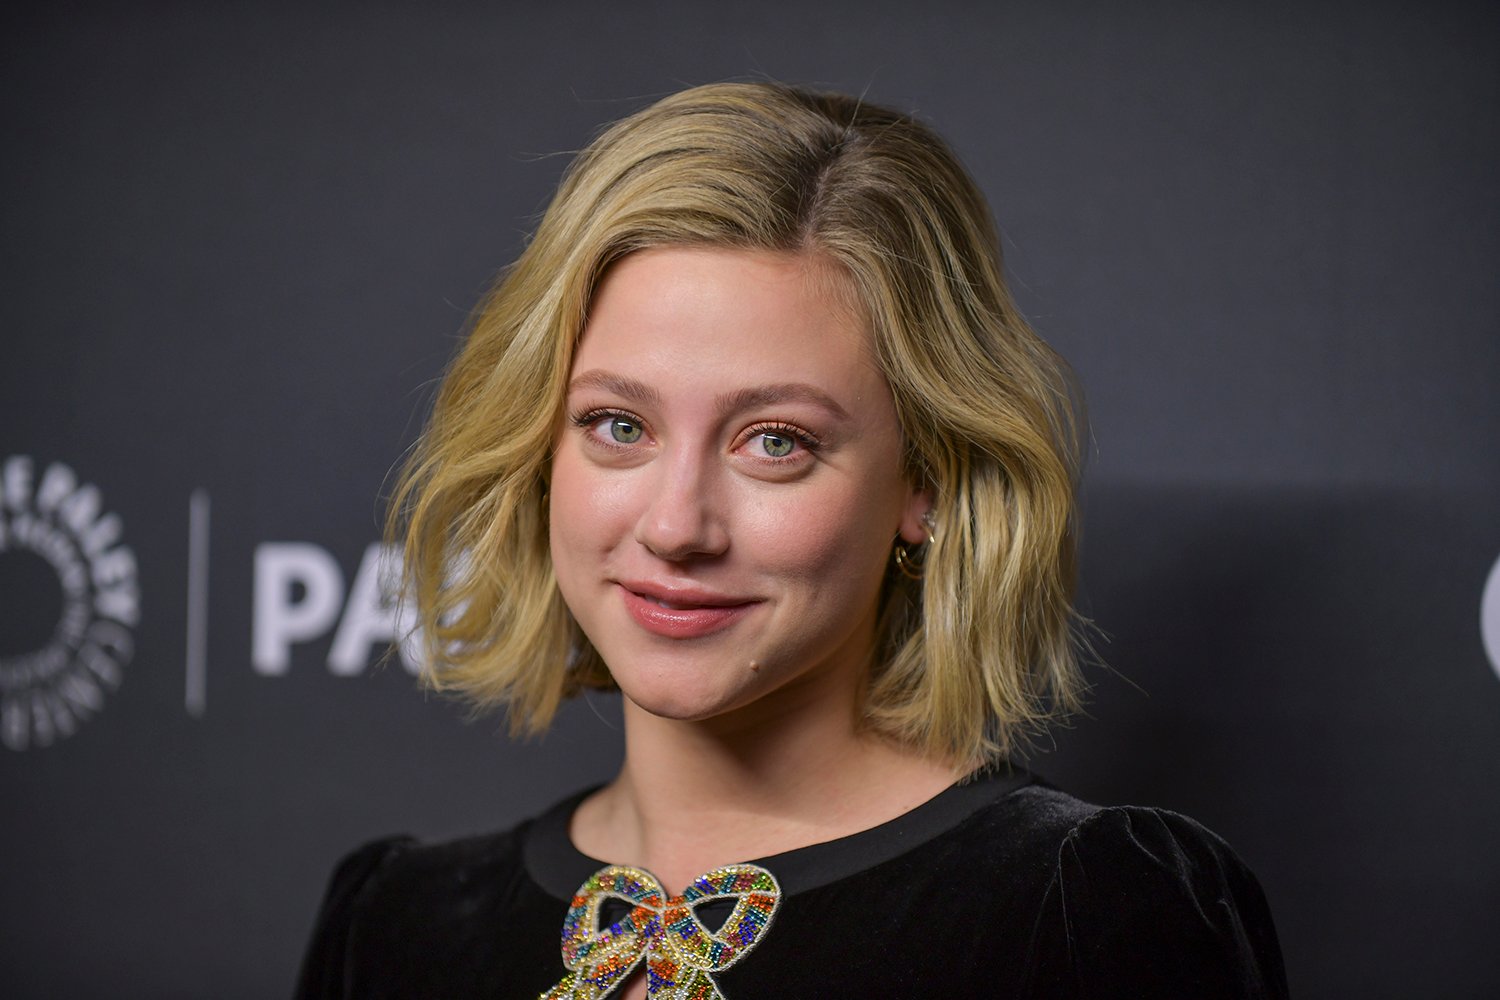 Lili Reinhart attends the 39th annual PaleyFest LA to discuss Riverdale